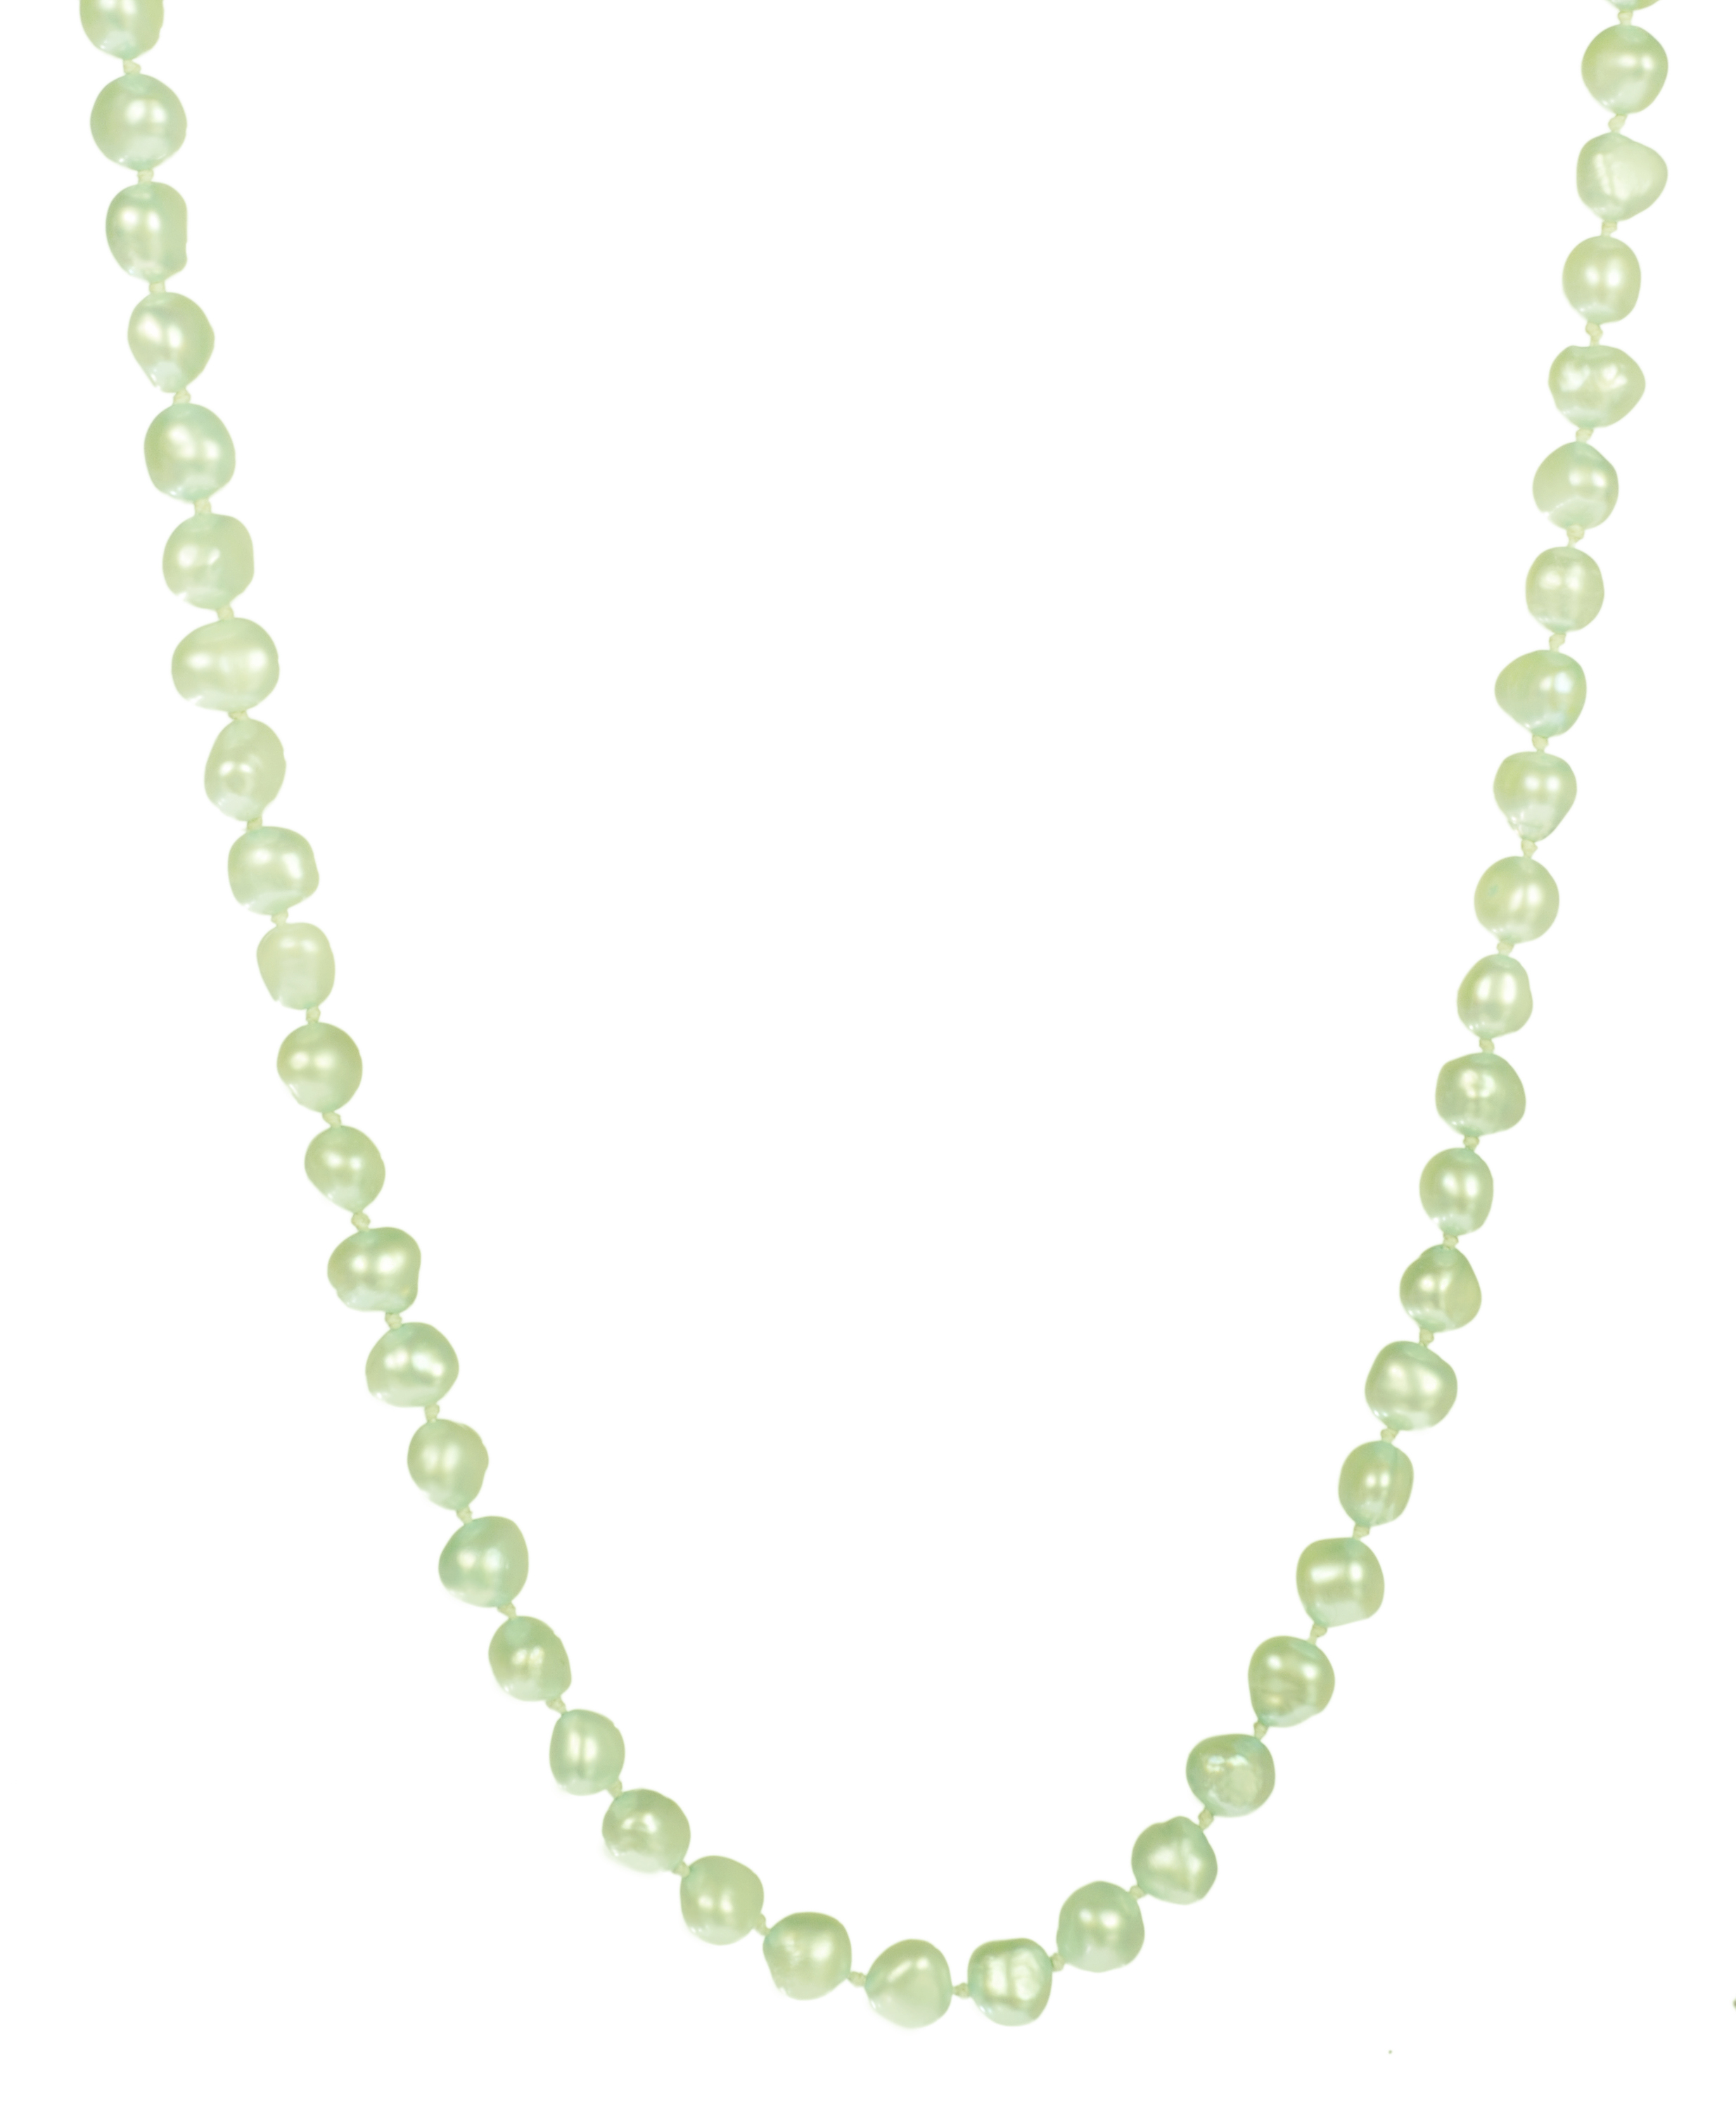 6-7mm Dyed Aqua Baroque Freshwater Cultured Pearl Endless Necklace, 50"